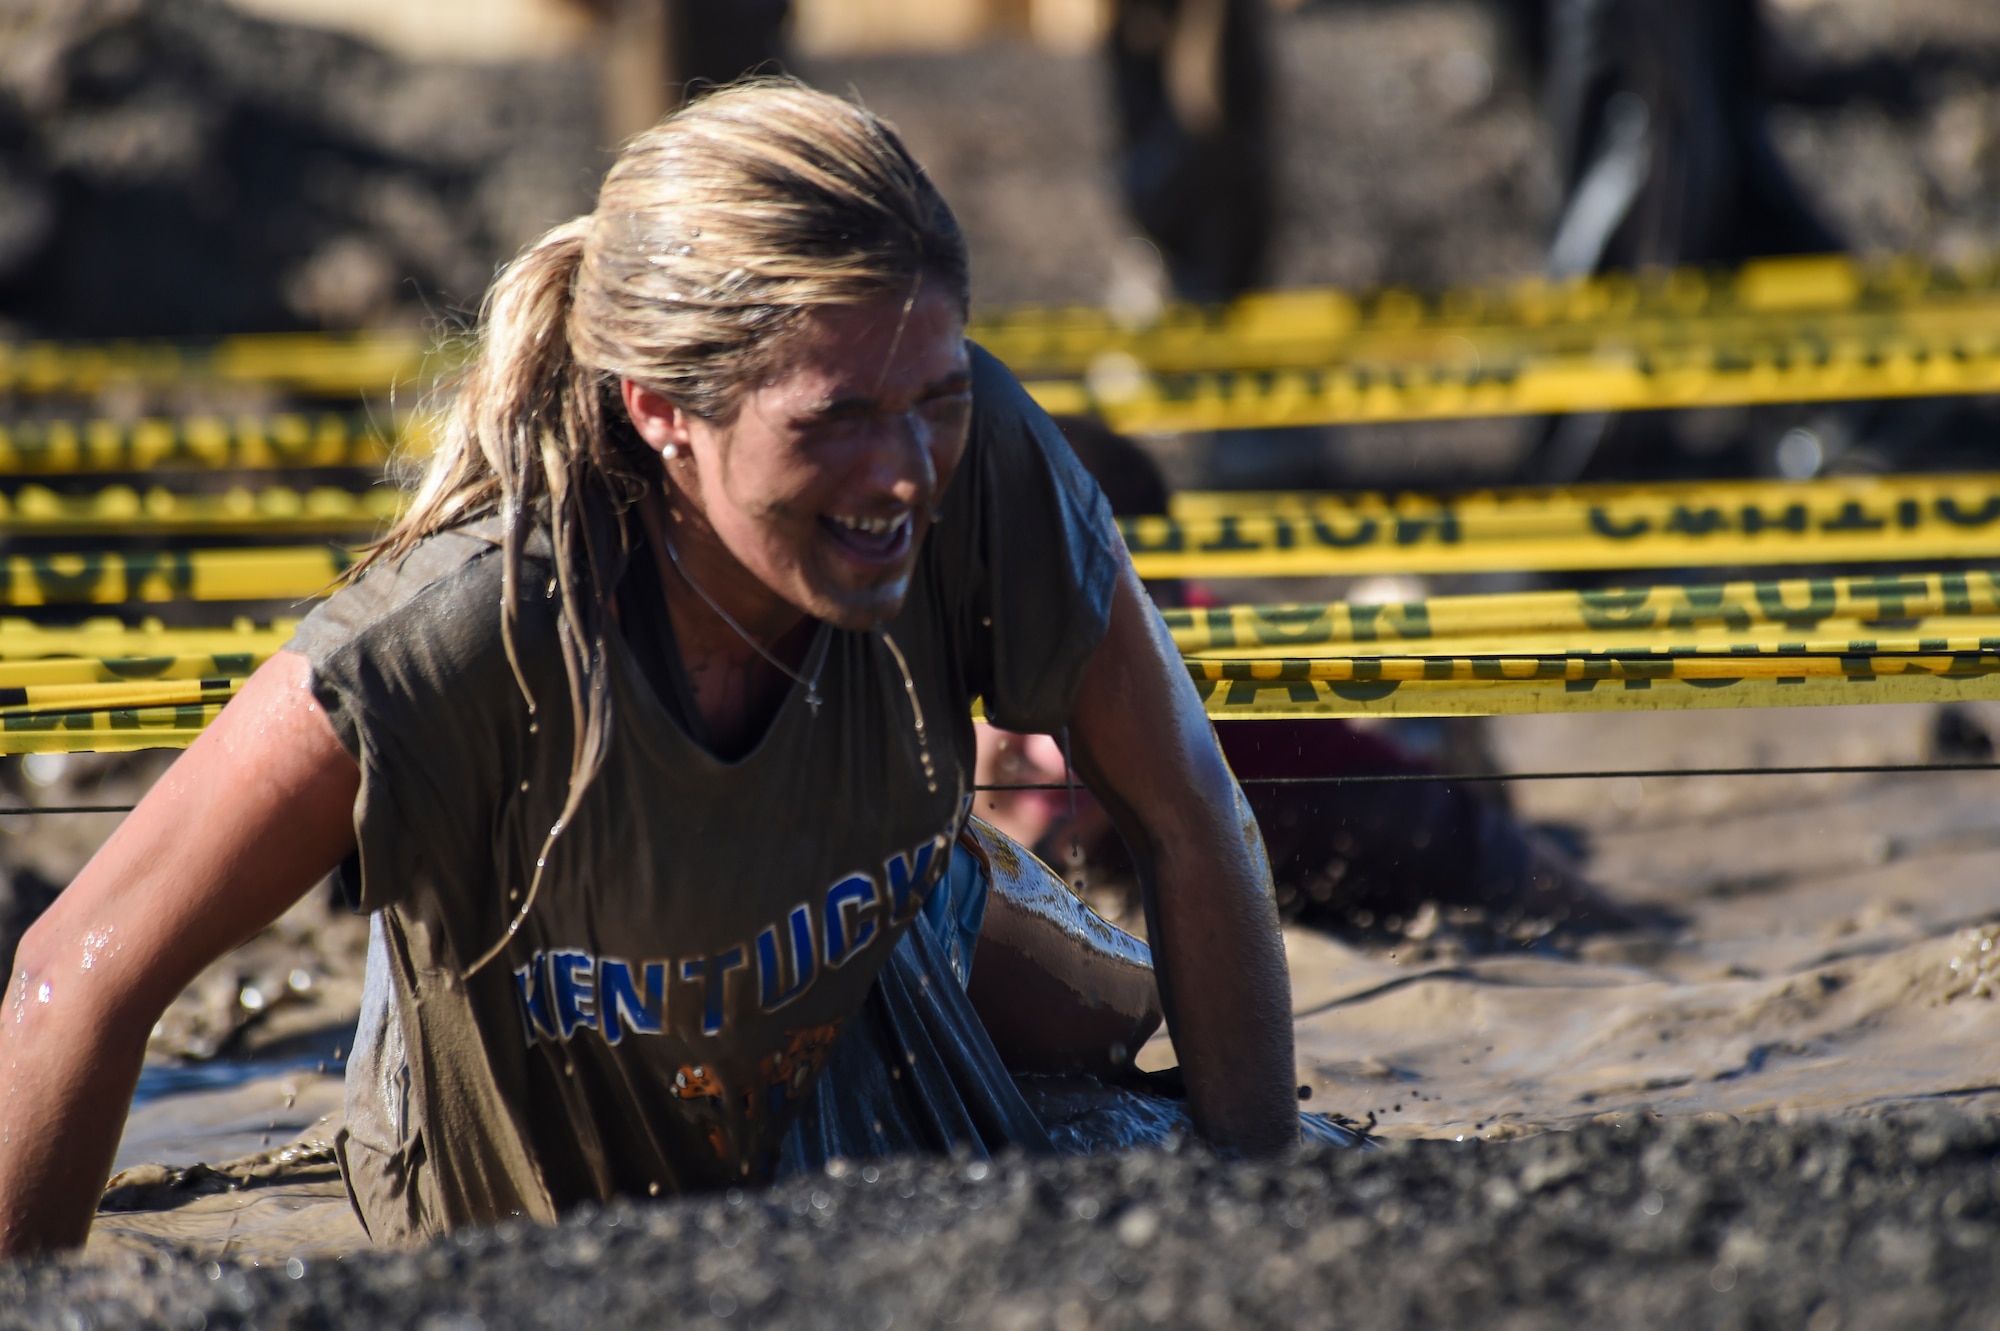 A Team Buckley member finishes the low-crawl obstacle during WARFIT Sept. 25, 2014, on Buckley Air Force Base, Colo. The 460th Civil Engineer Squadron hosted the September WARFIT, which consisted of a 5K run and a mud obstacle course. WARFIT is a way for the 460th Space Wing and base partner units to get together and stay physically fit. (U.S. Air Force photo by Senior Airman Phillip Houk/Released)